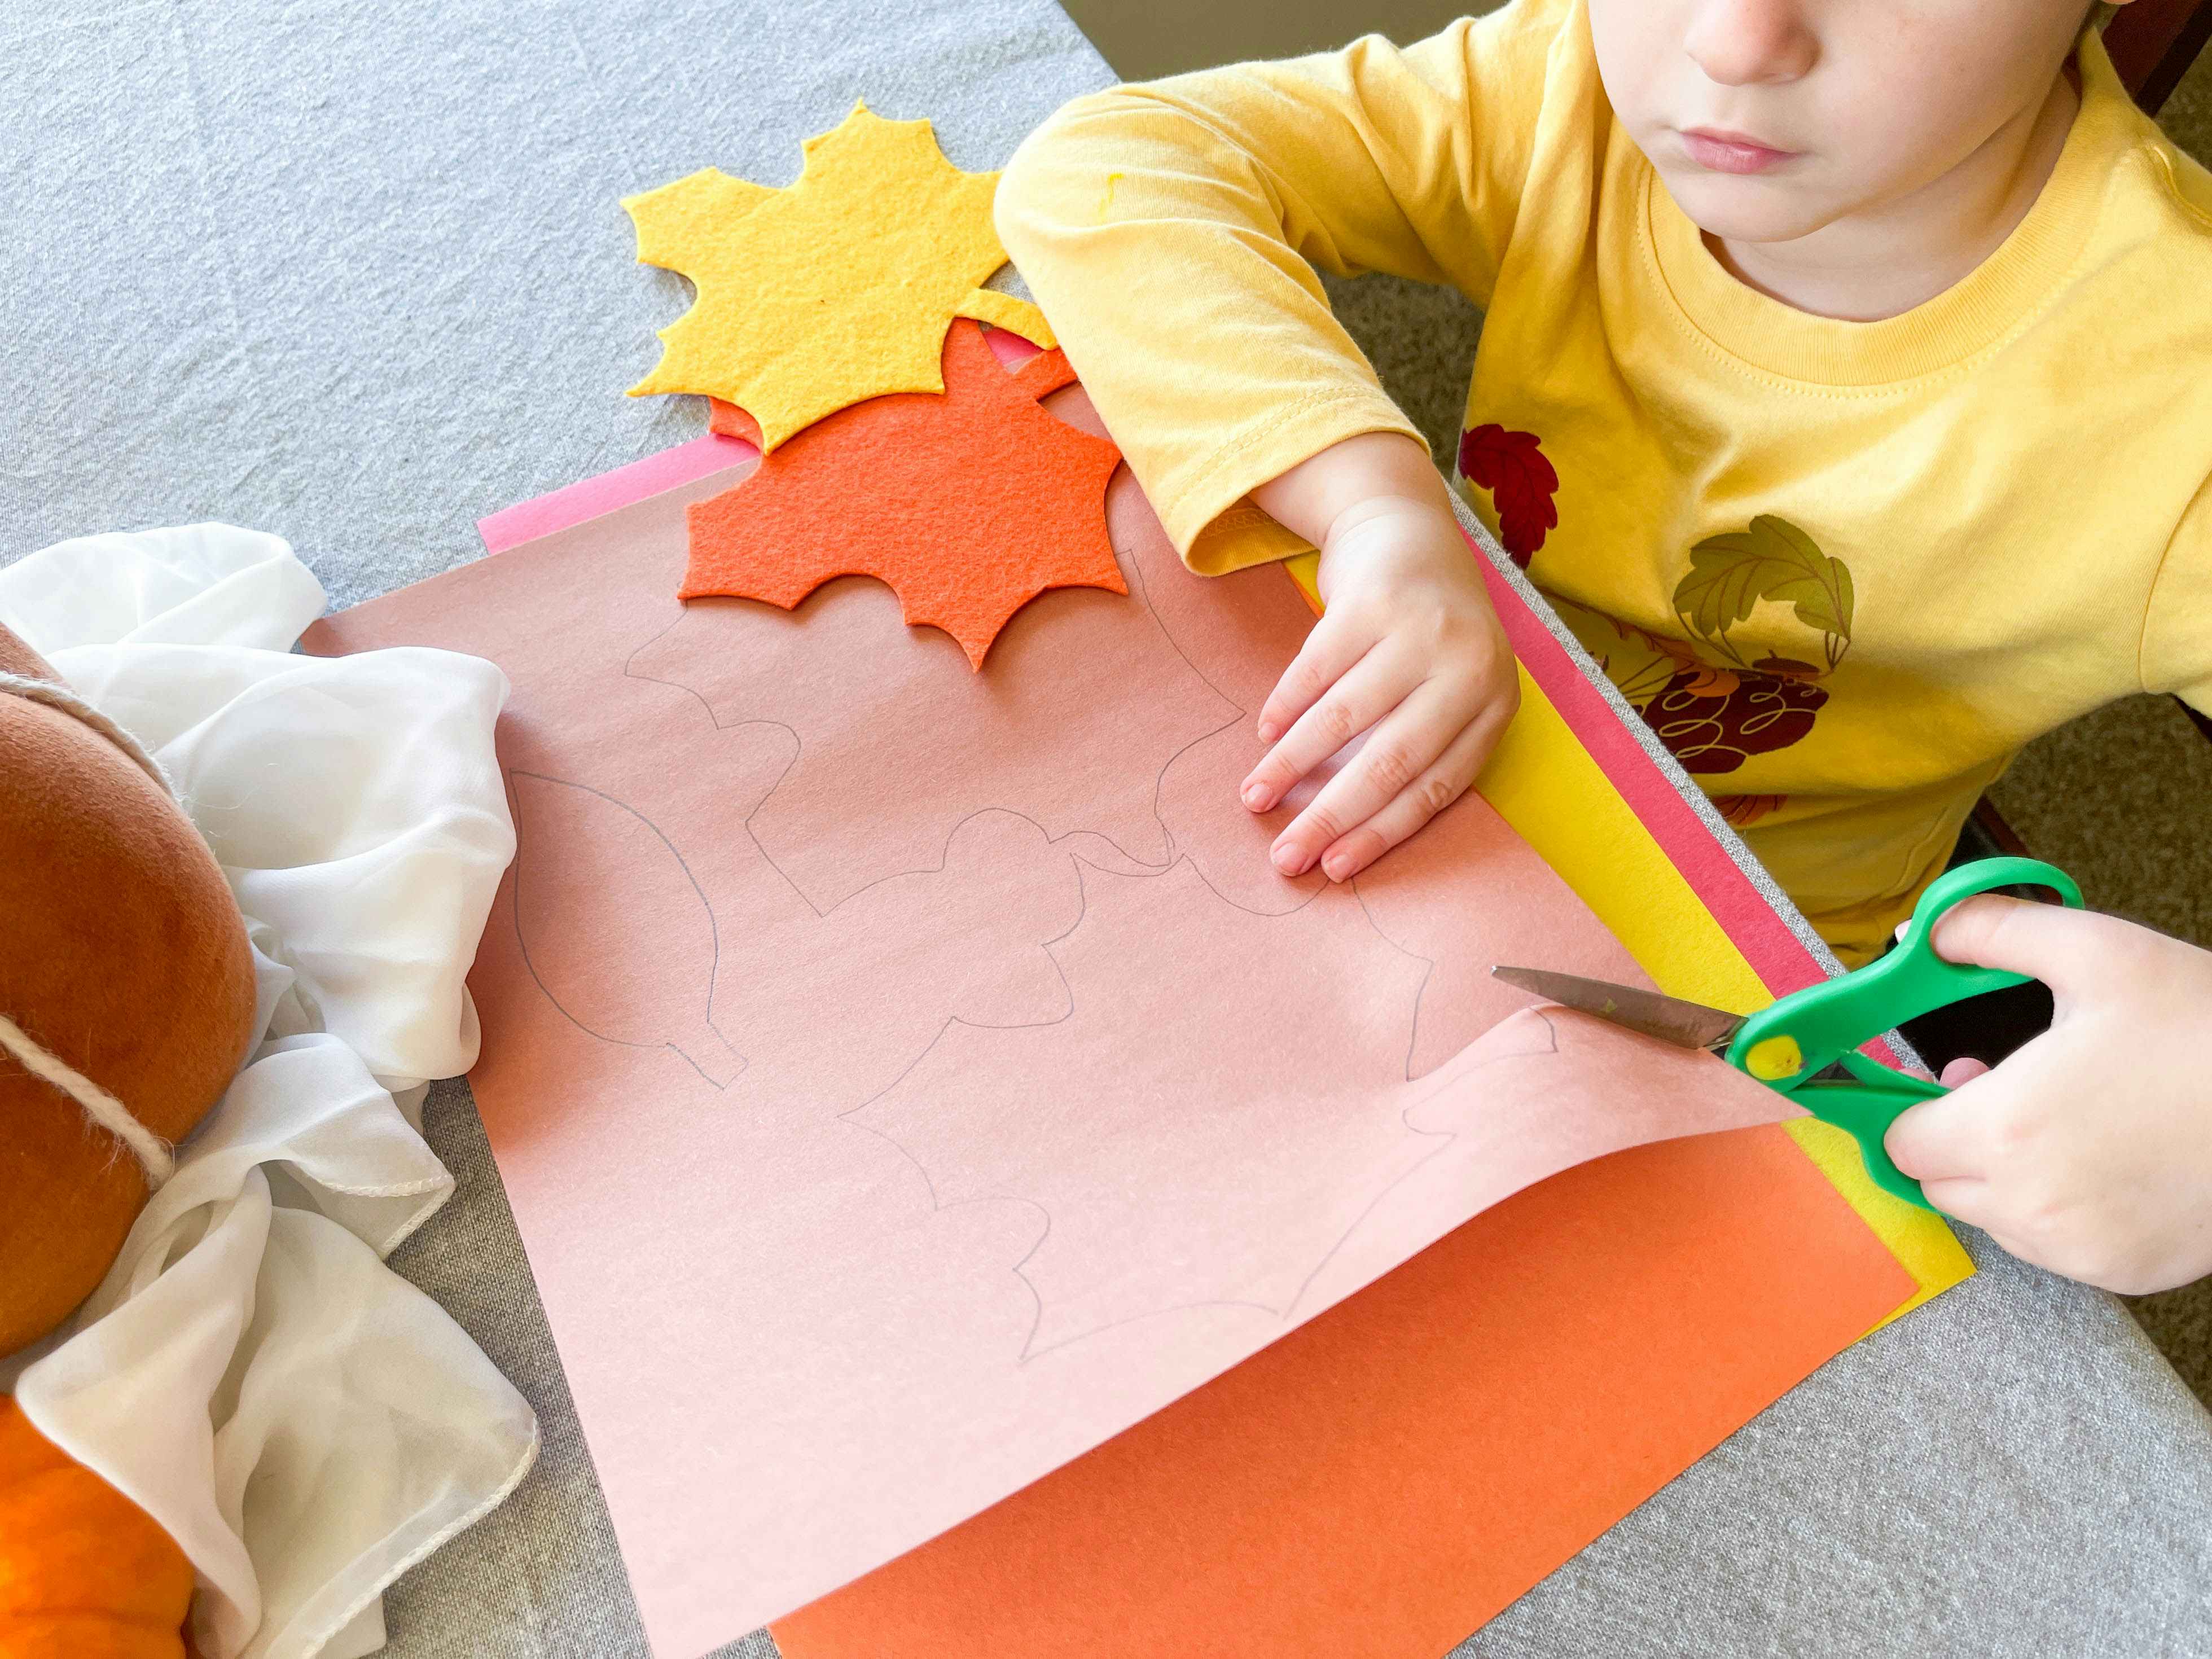 a young child cutting leaf shapes out of construction paper